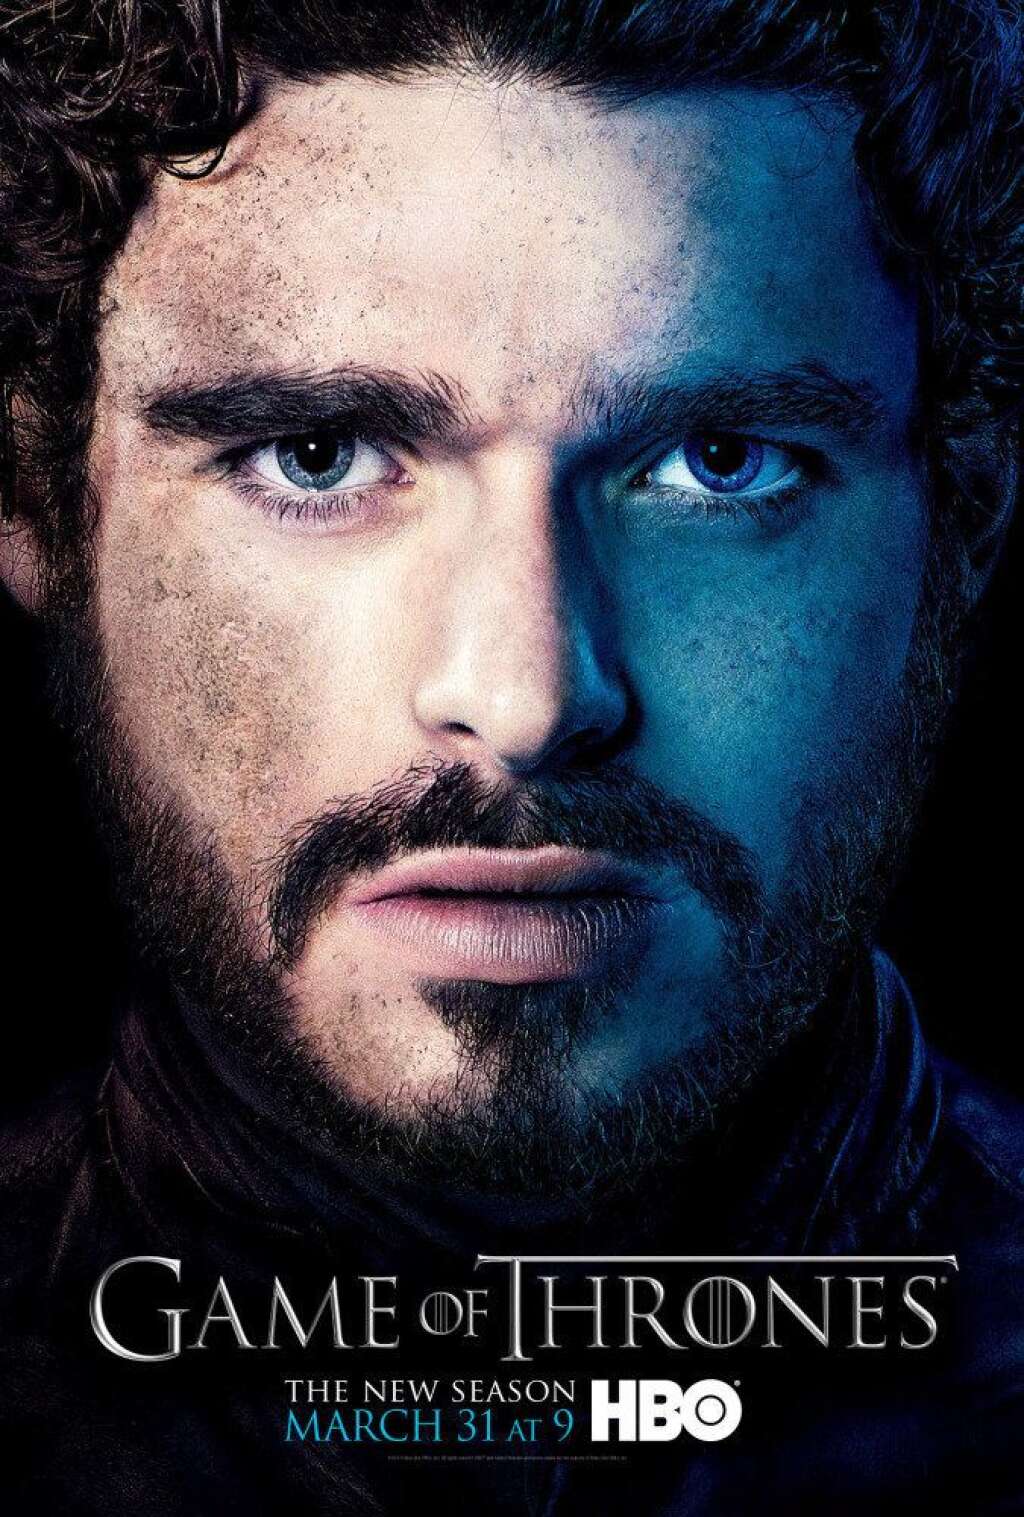 'Game of Thrones' Character Posters - Richard Madden as Robb Stark.